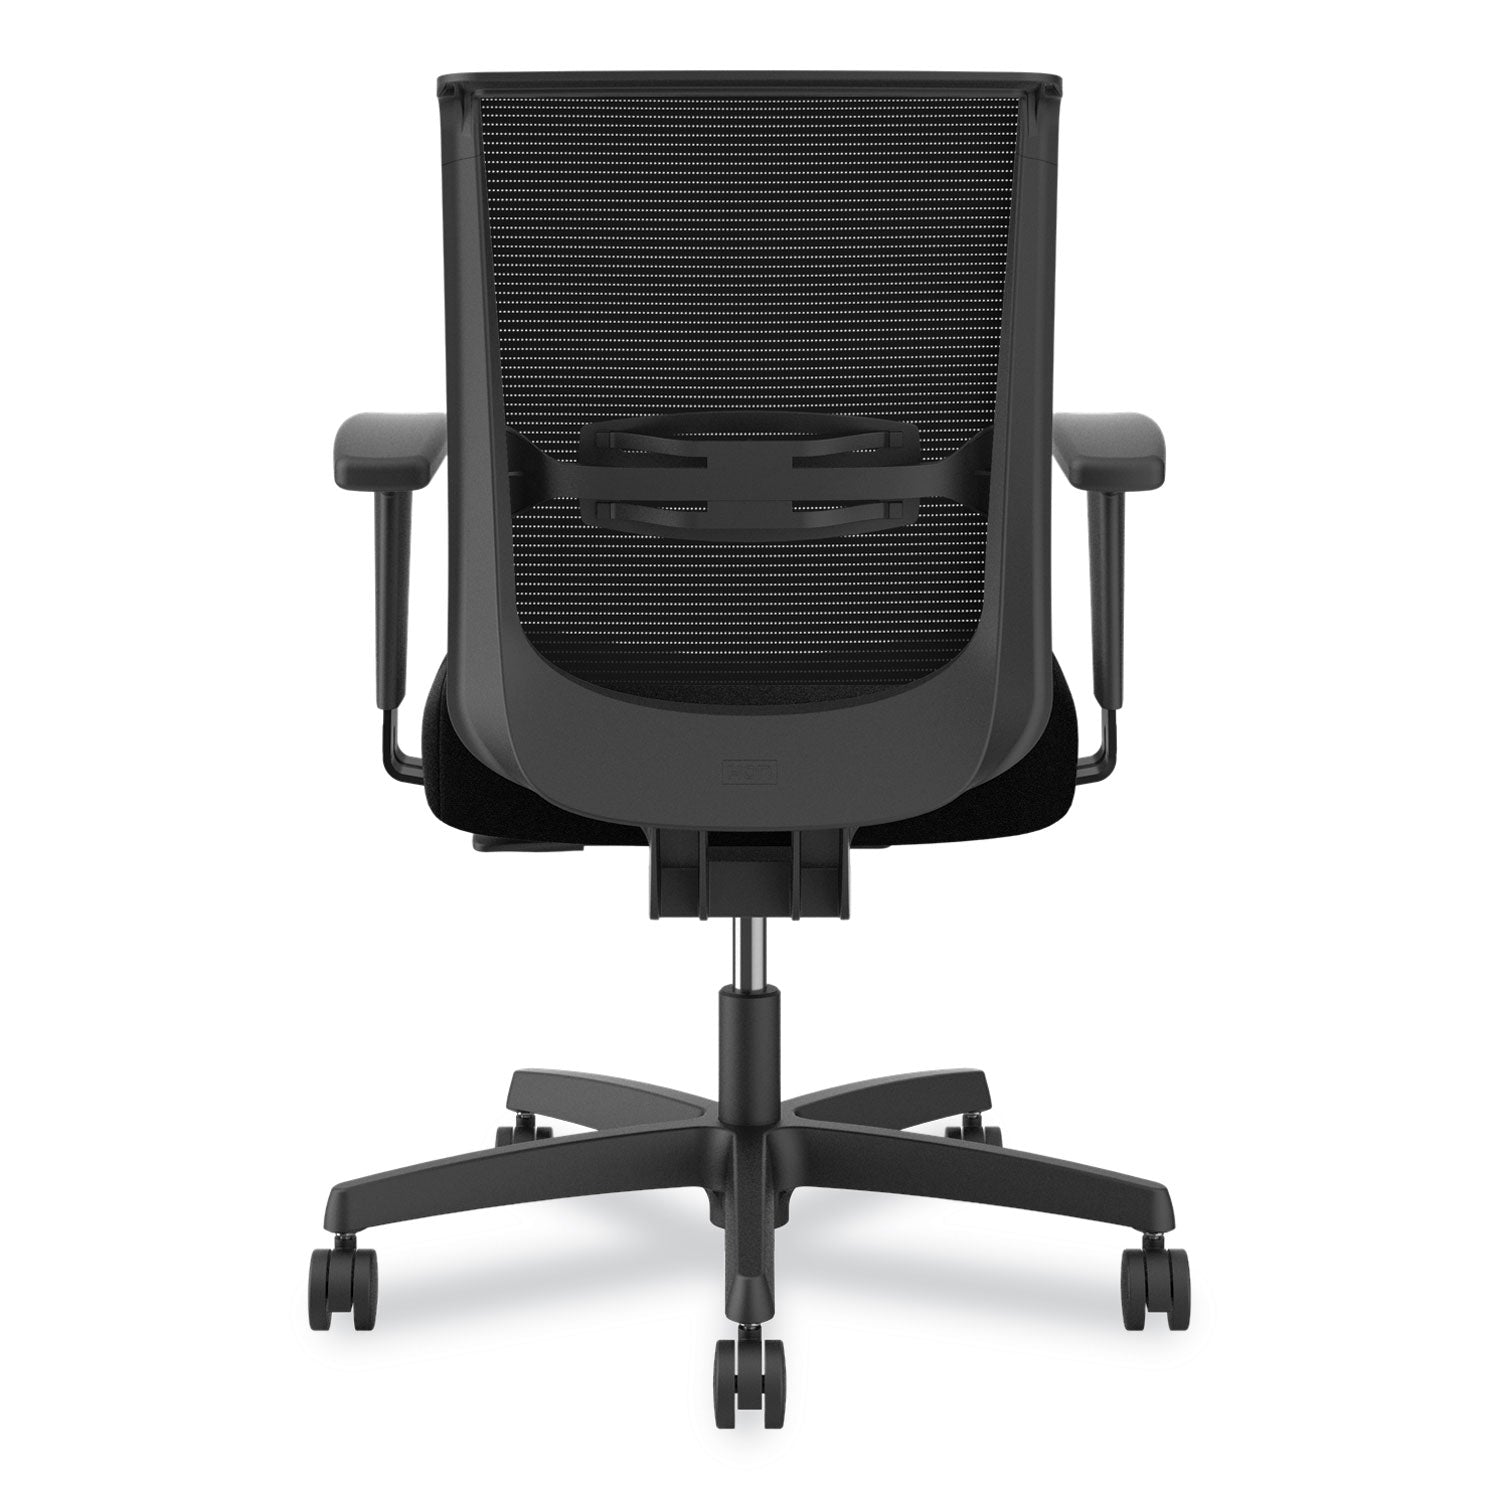 convergence-mid-back-task-chair-swivel-tilt-up-to-275lb-165-to-21-seat-ht-black-seat-back-frameships-in-7-10-bus-days_honcmy1acu10 - 3